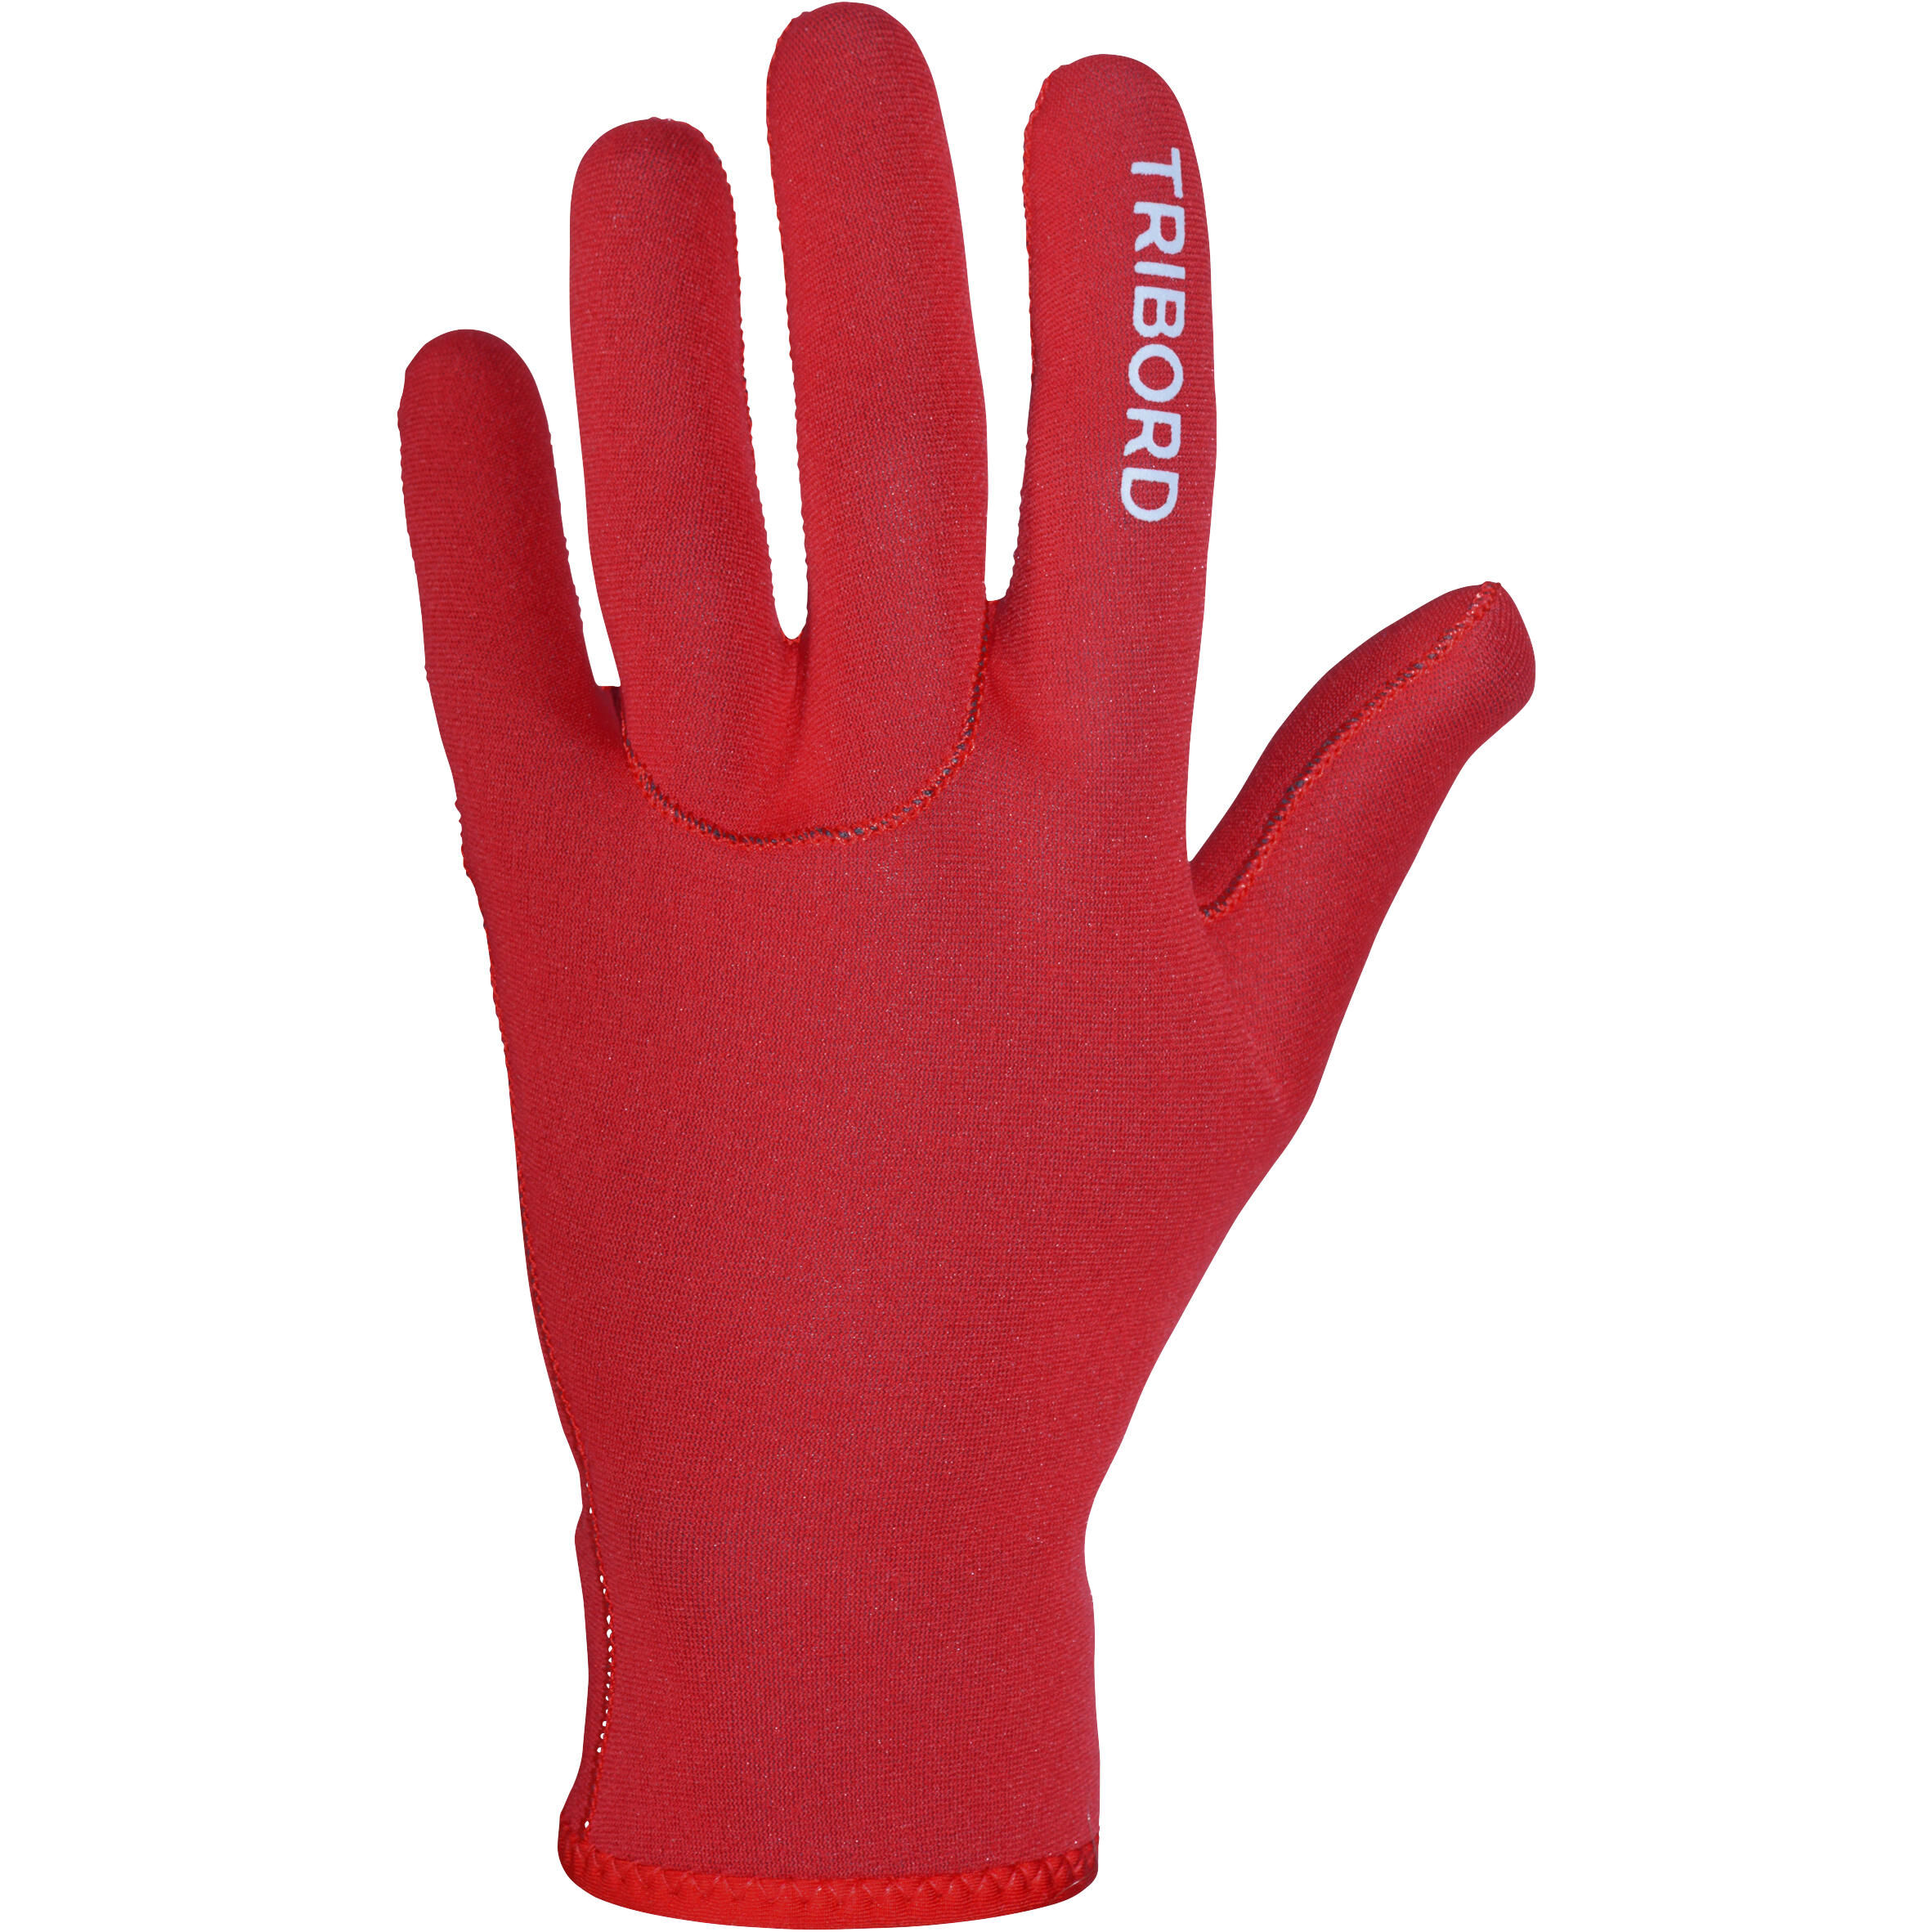 SUBEA Bero SCD 100 2mm Diving Gloves - Red